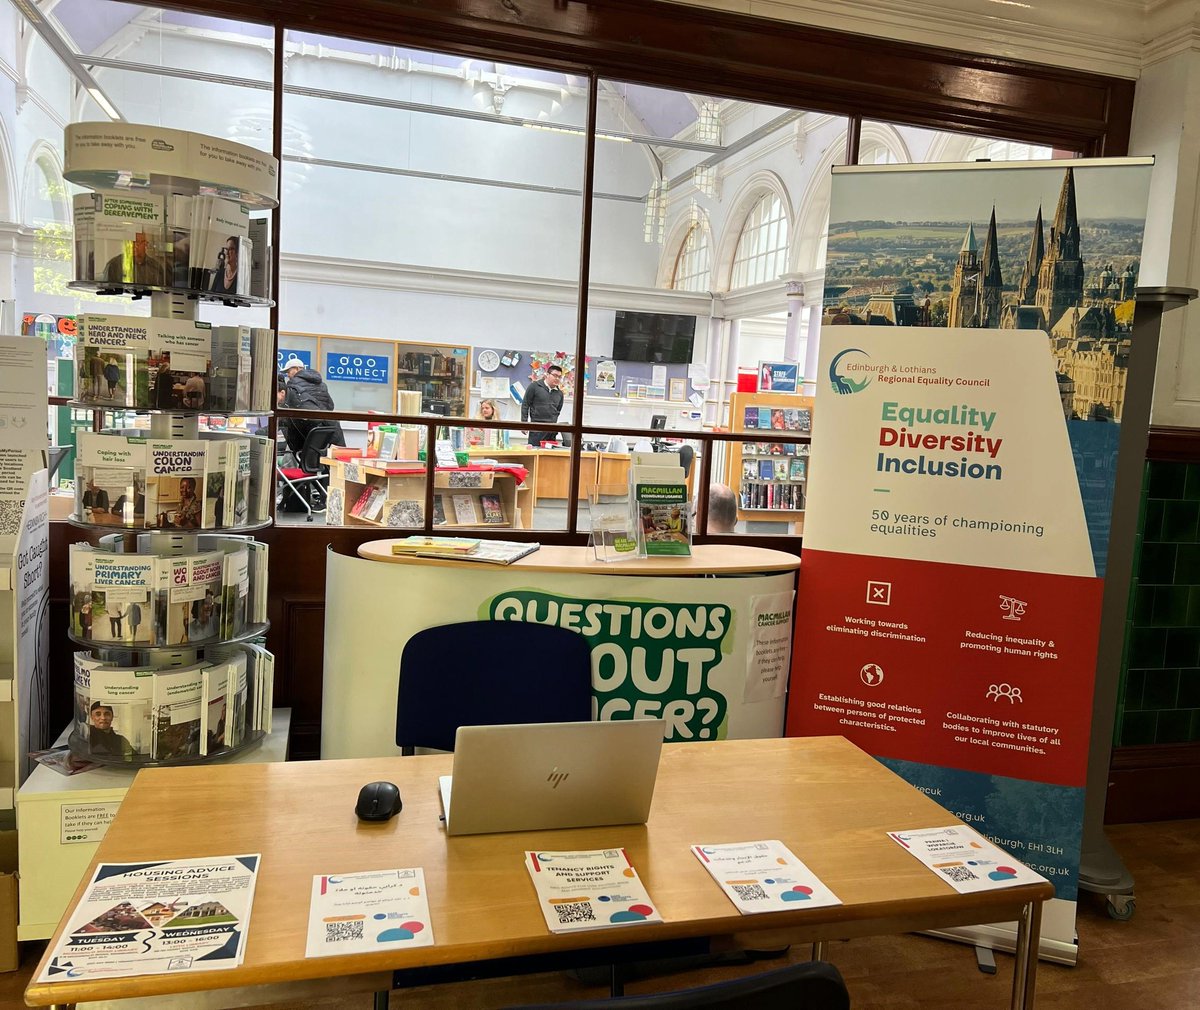 Happening now at McDonald Road Library! Join us for a housing advice session with our project worker from Tenancy Rights and Support Services. Get expert advice and support on your housing concerns. McDonald Road Library, Edinburgh, EH7 4LU